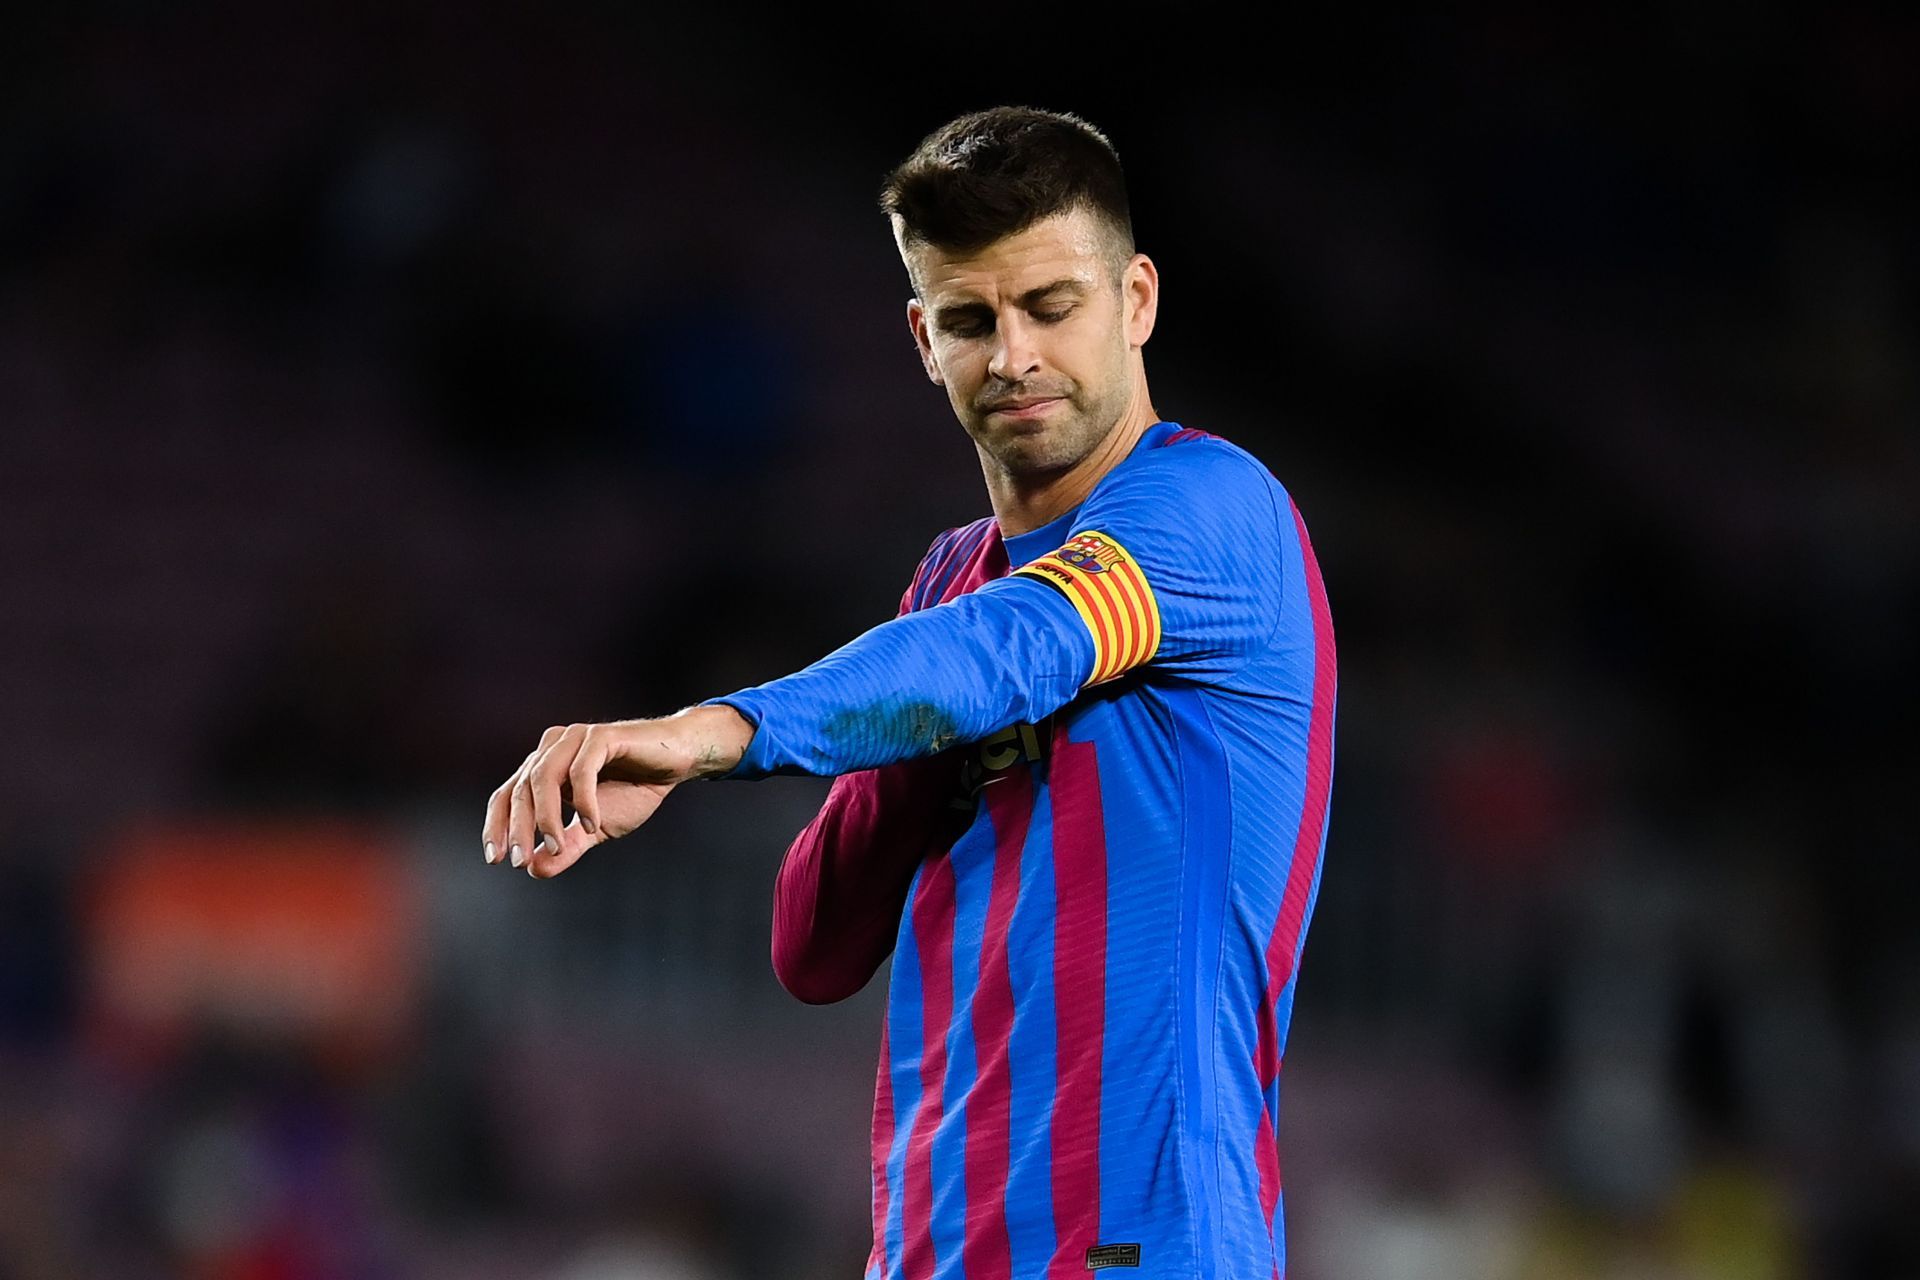 Pique has proudly worn the armband for the Catalans